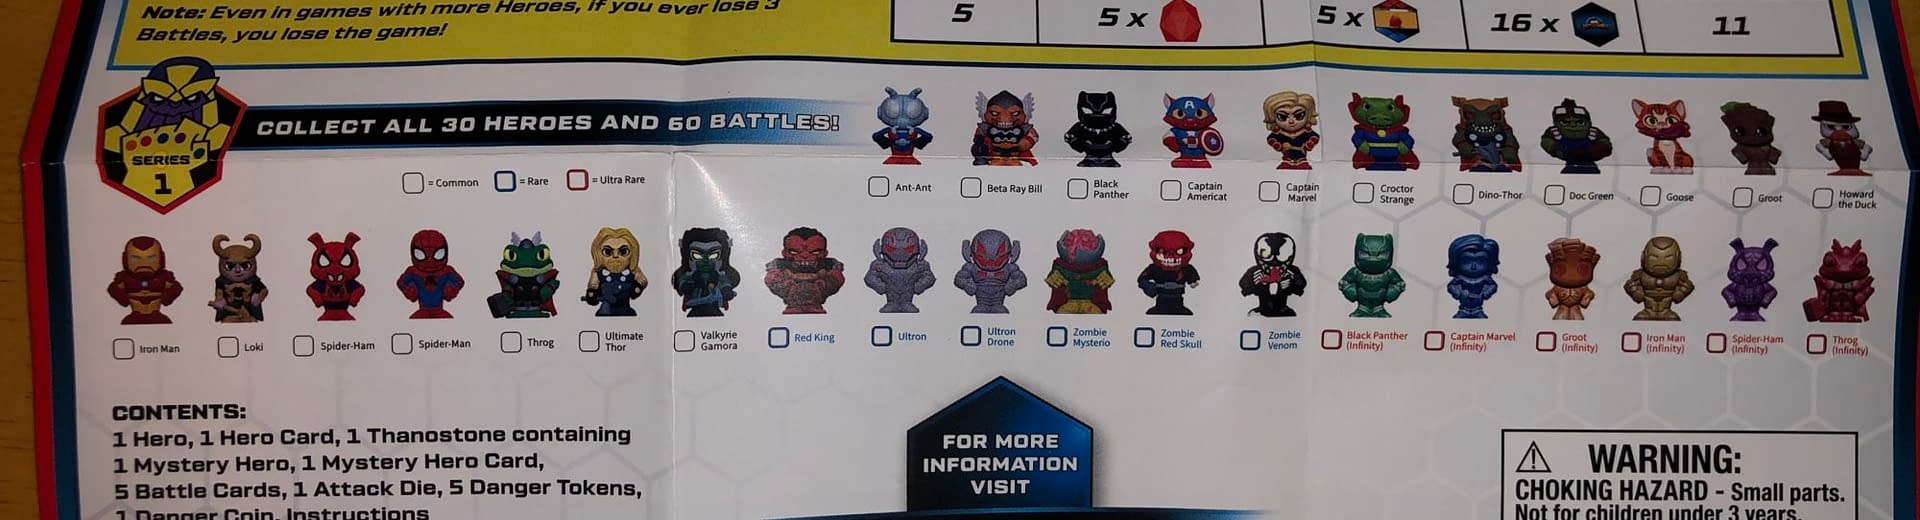 Funko Combines Collecting and Gaming with Marvel Battleworld